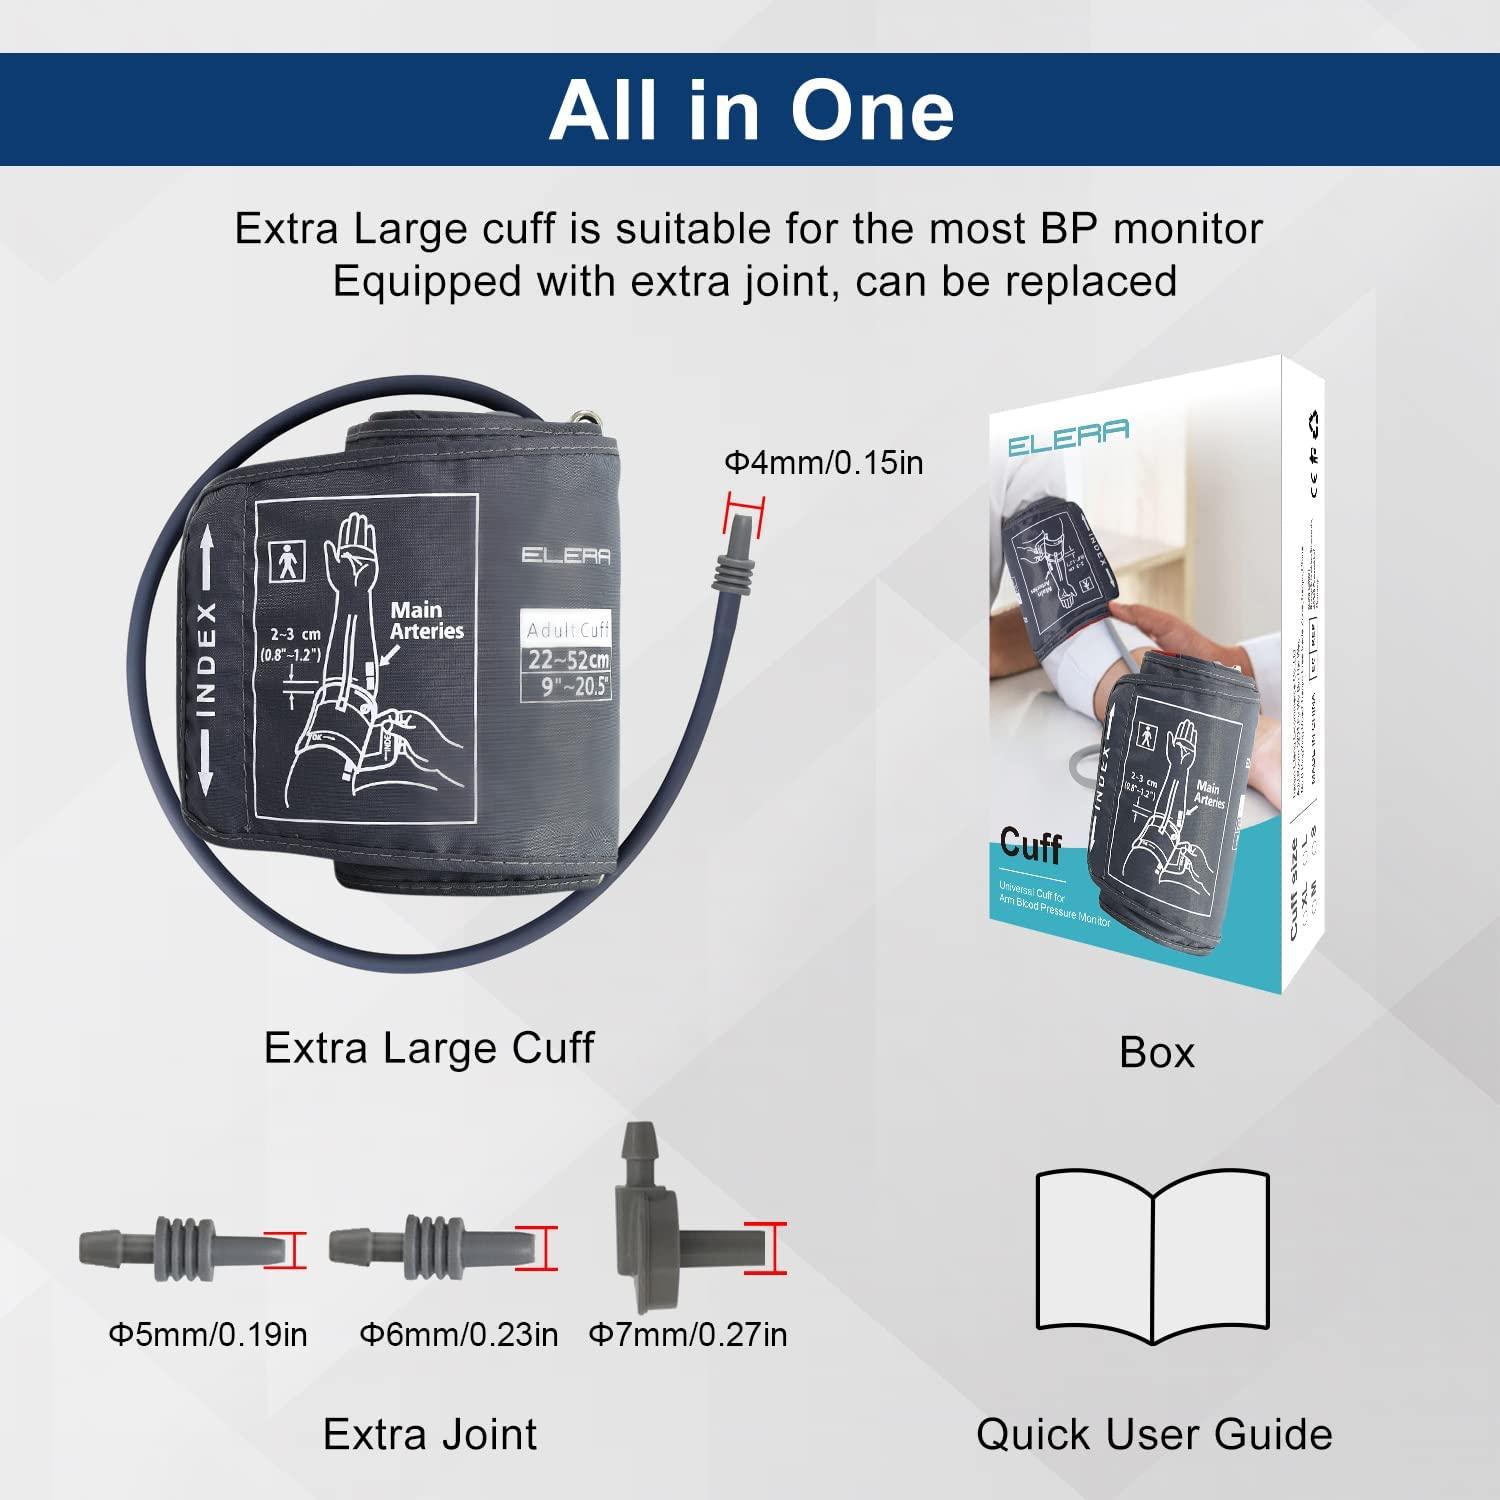 BLUE JAY™ BLOOD PRESSURE MONITOR WITH EXTRA LARGE CUFF